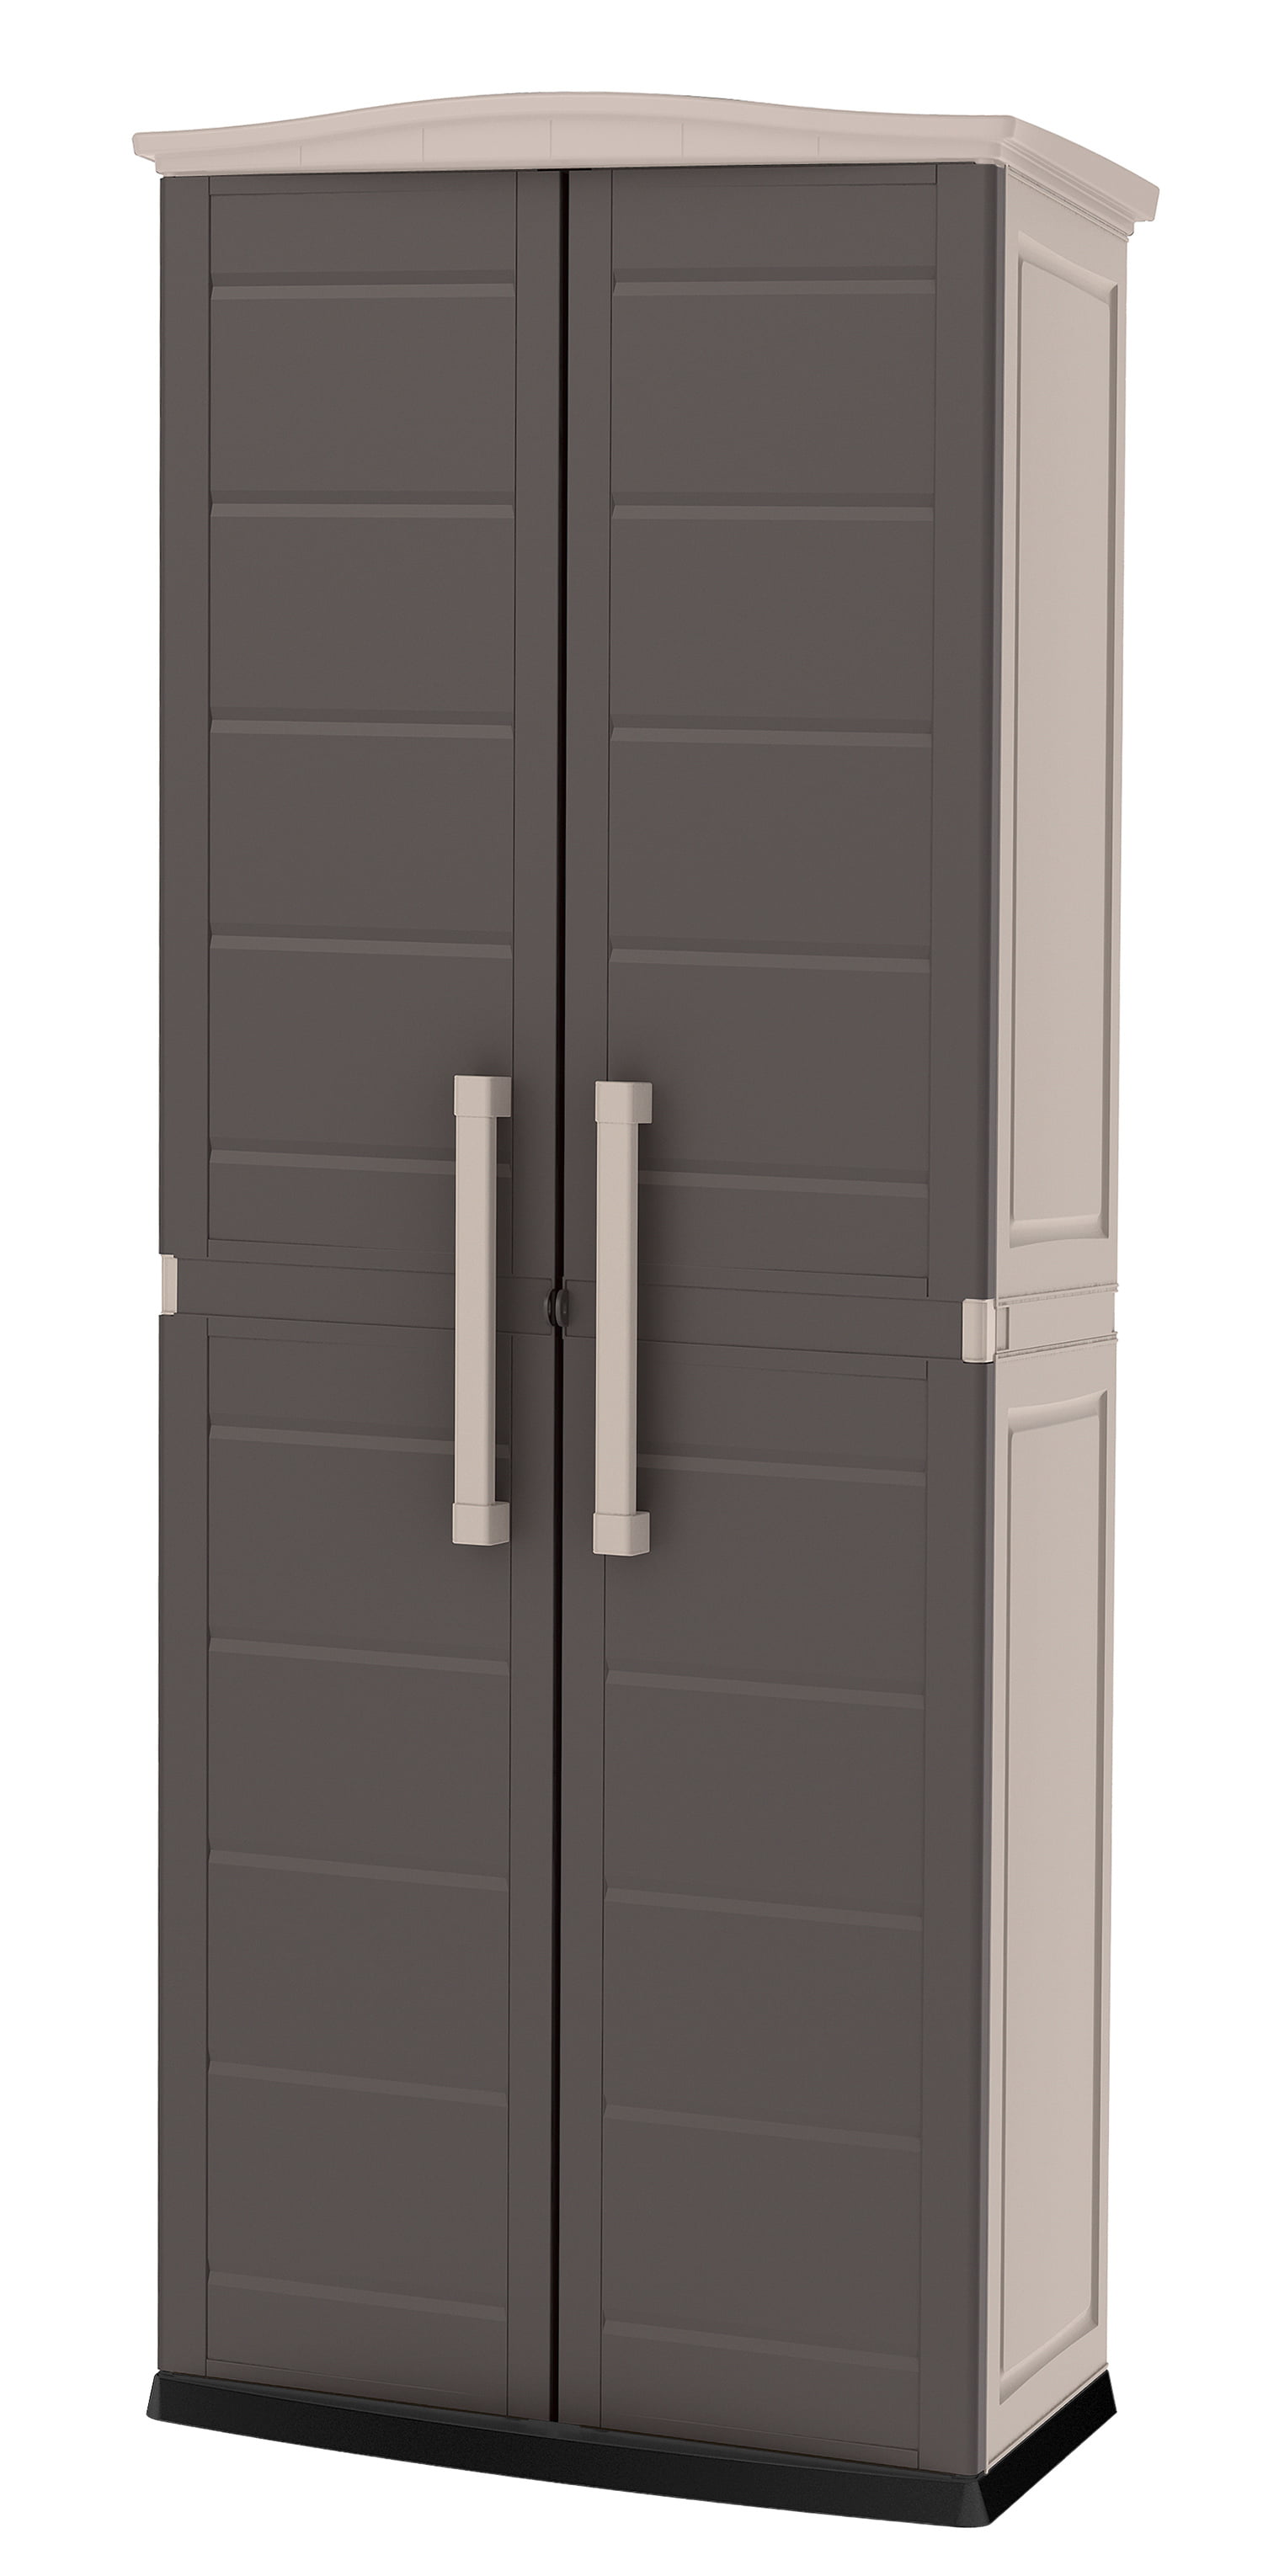 Keter Boston Tall Indoor Outdoor Storage Utility Cabinet Brown